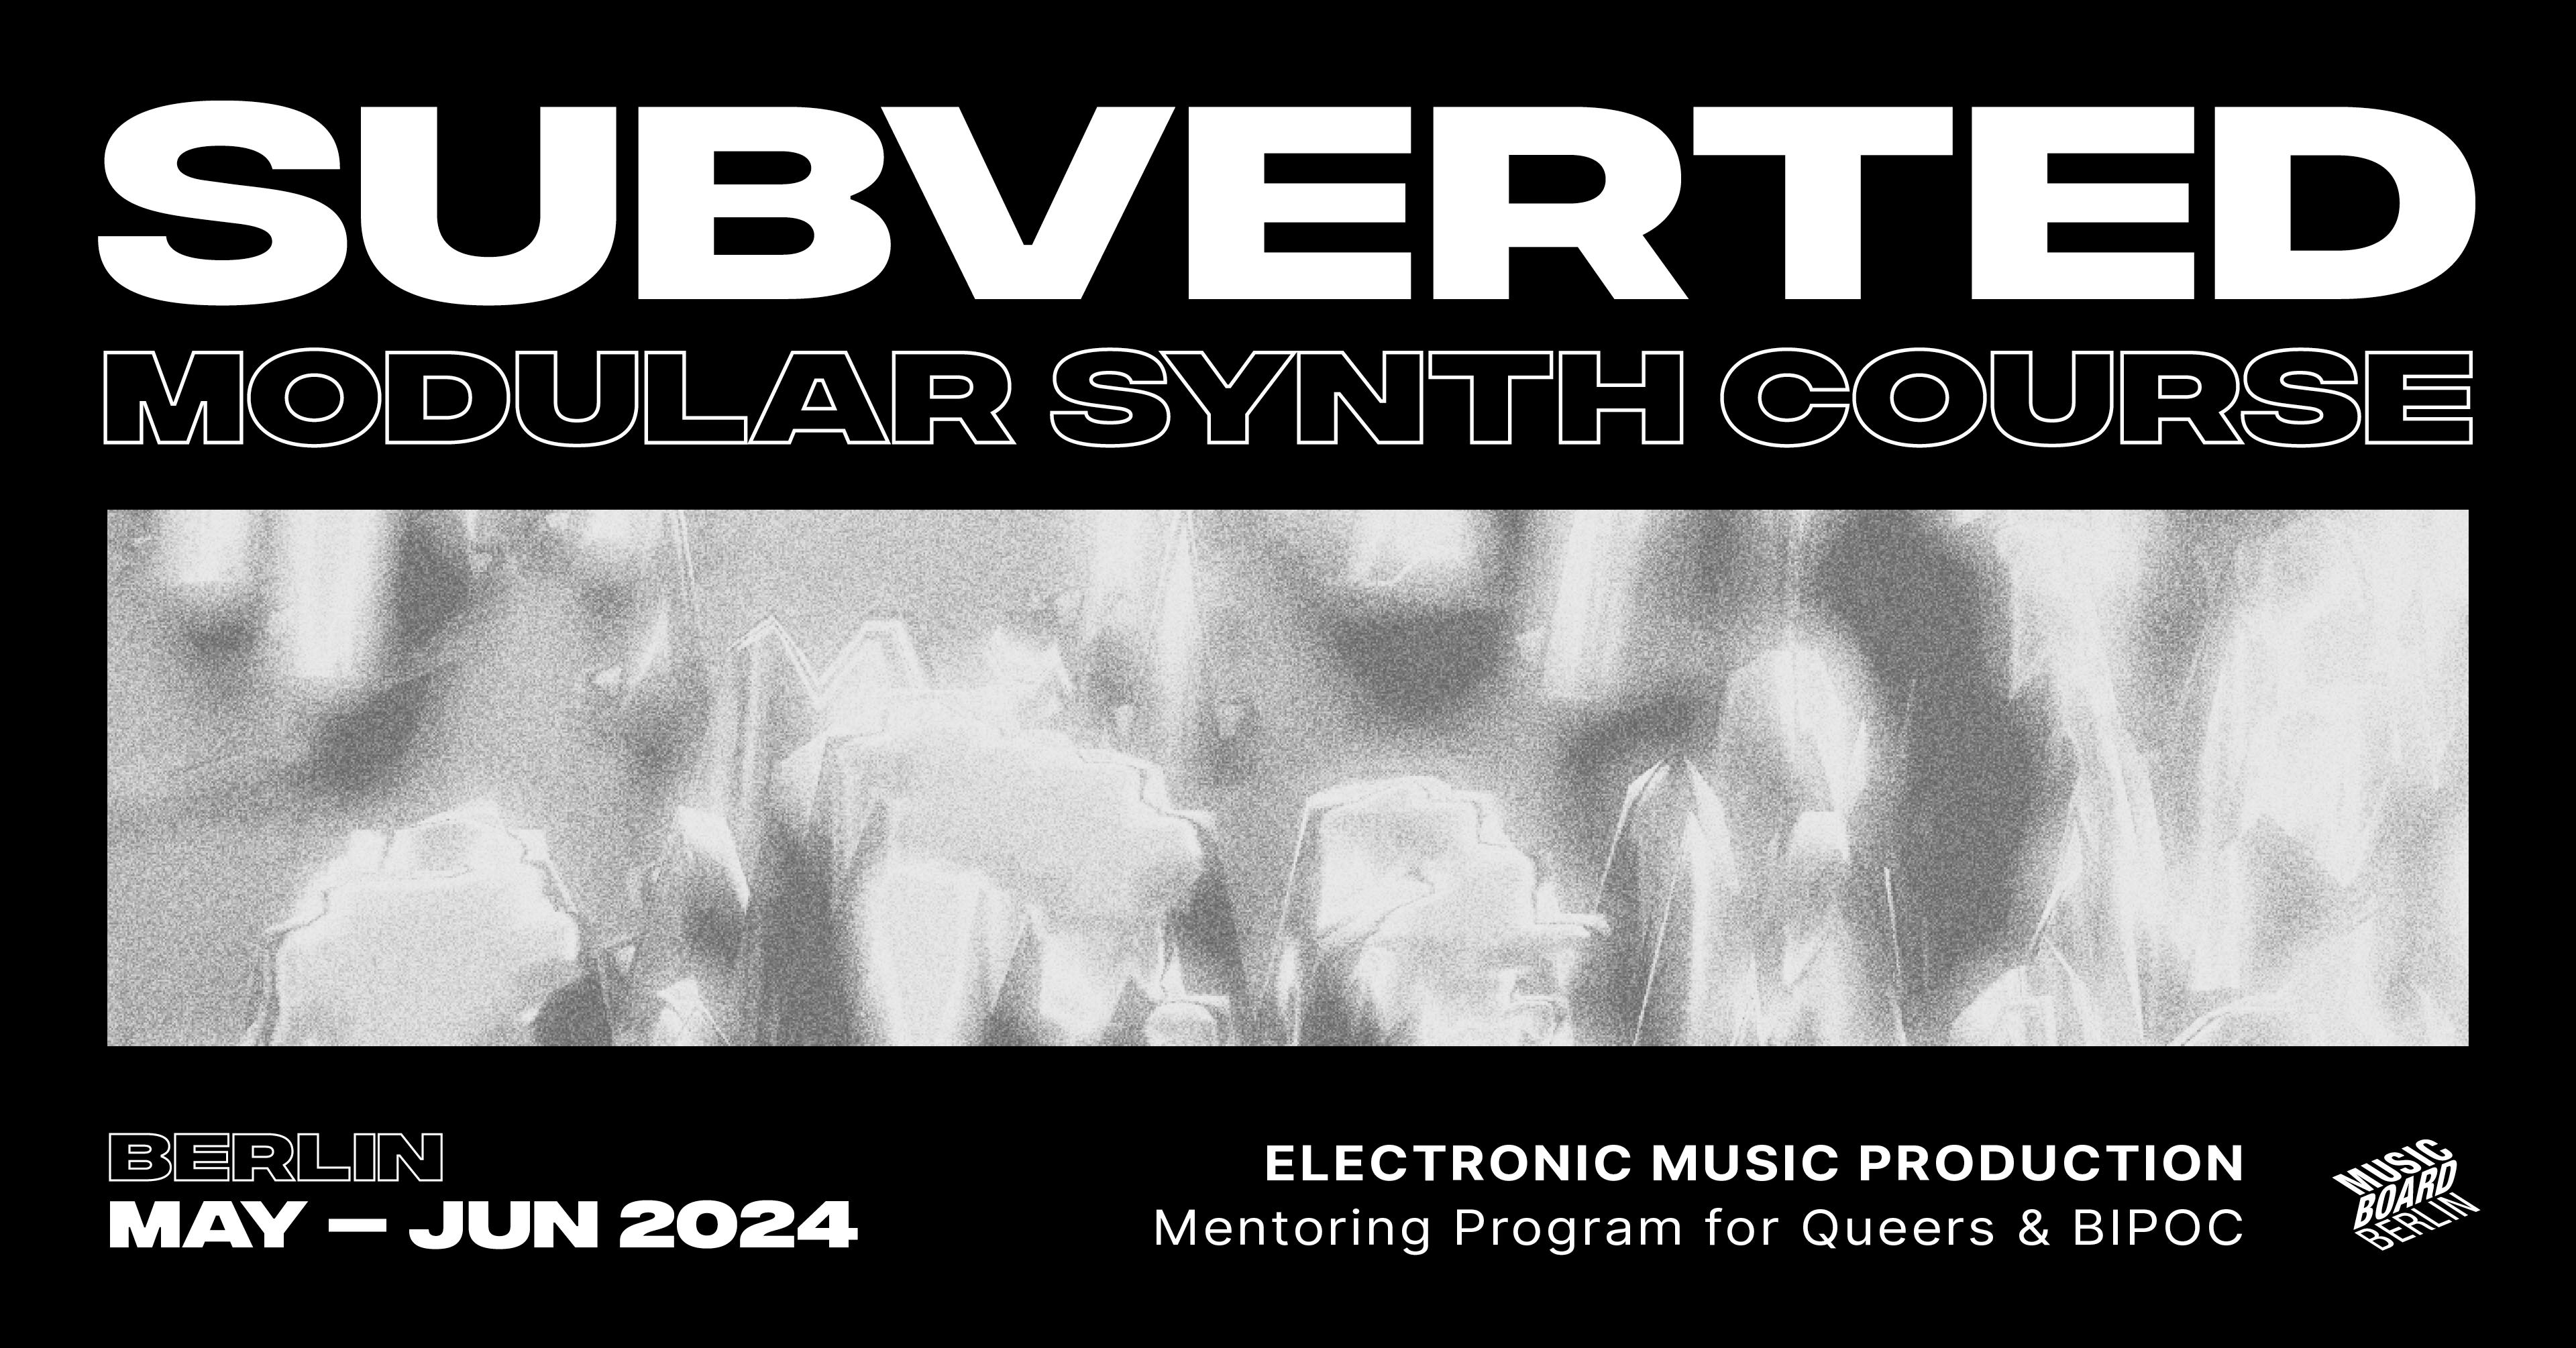 Subverted. Modular Synth Course for Queers and BIPOC - フライヤー表